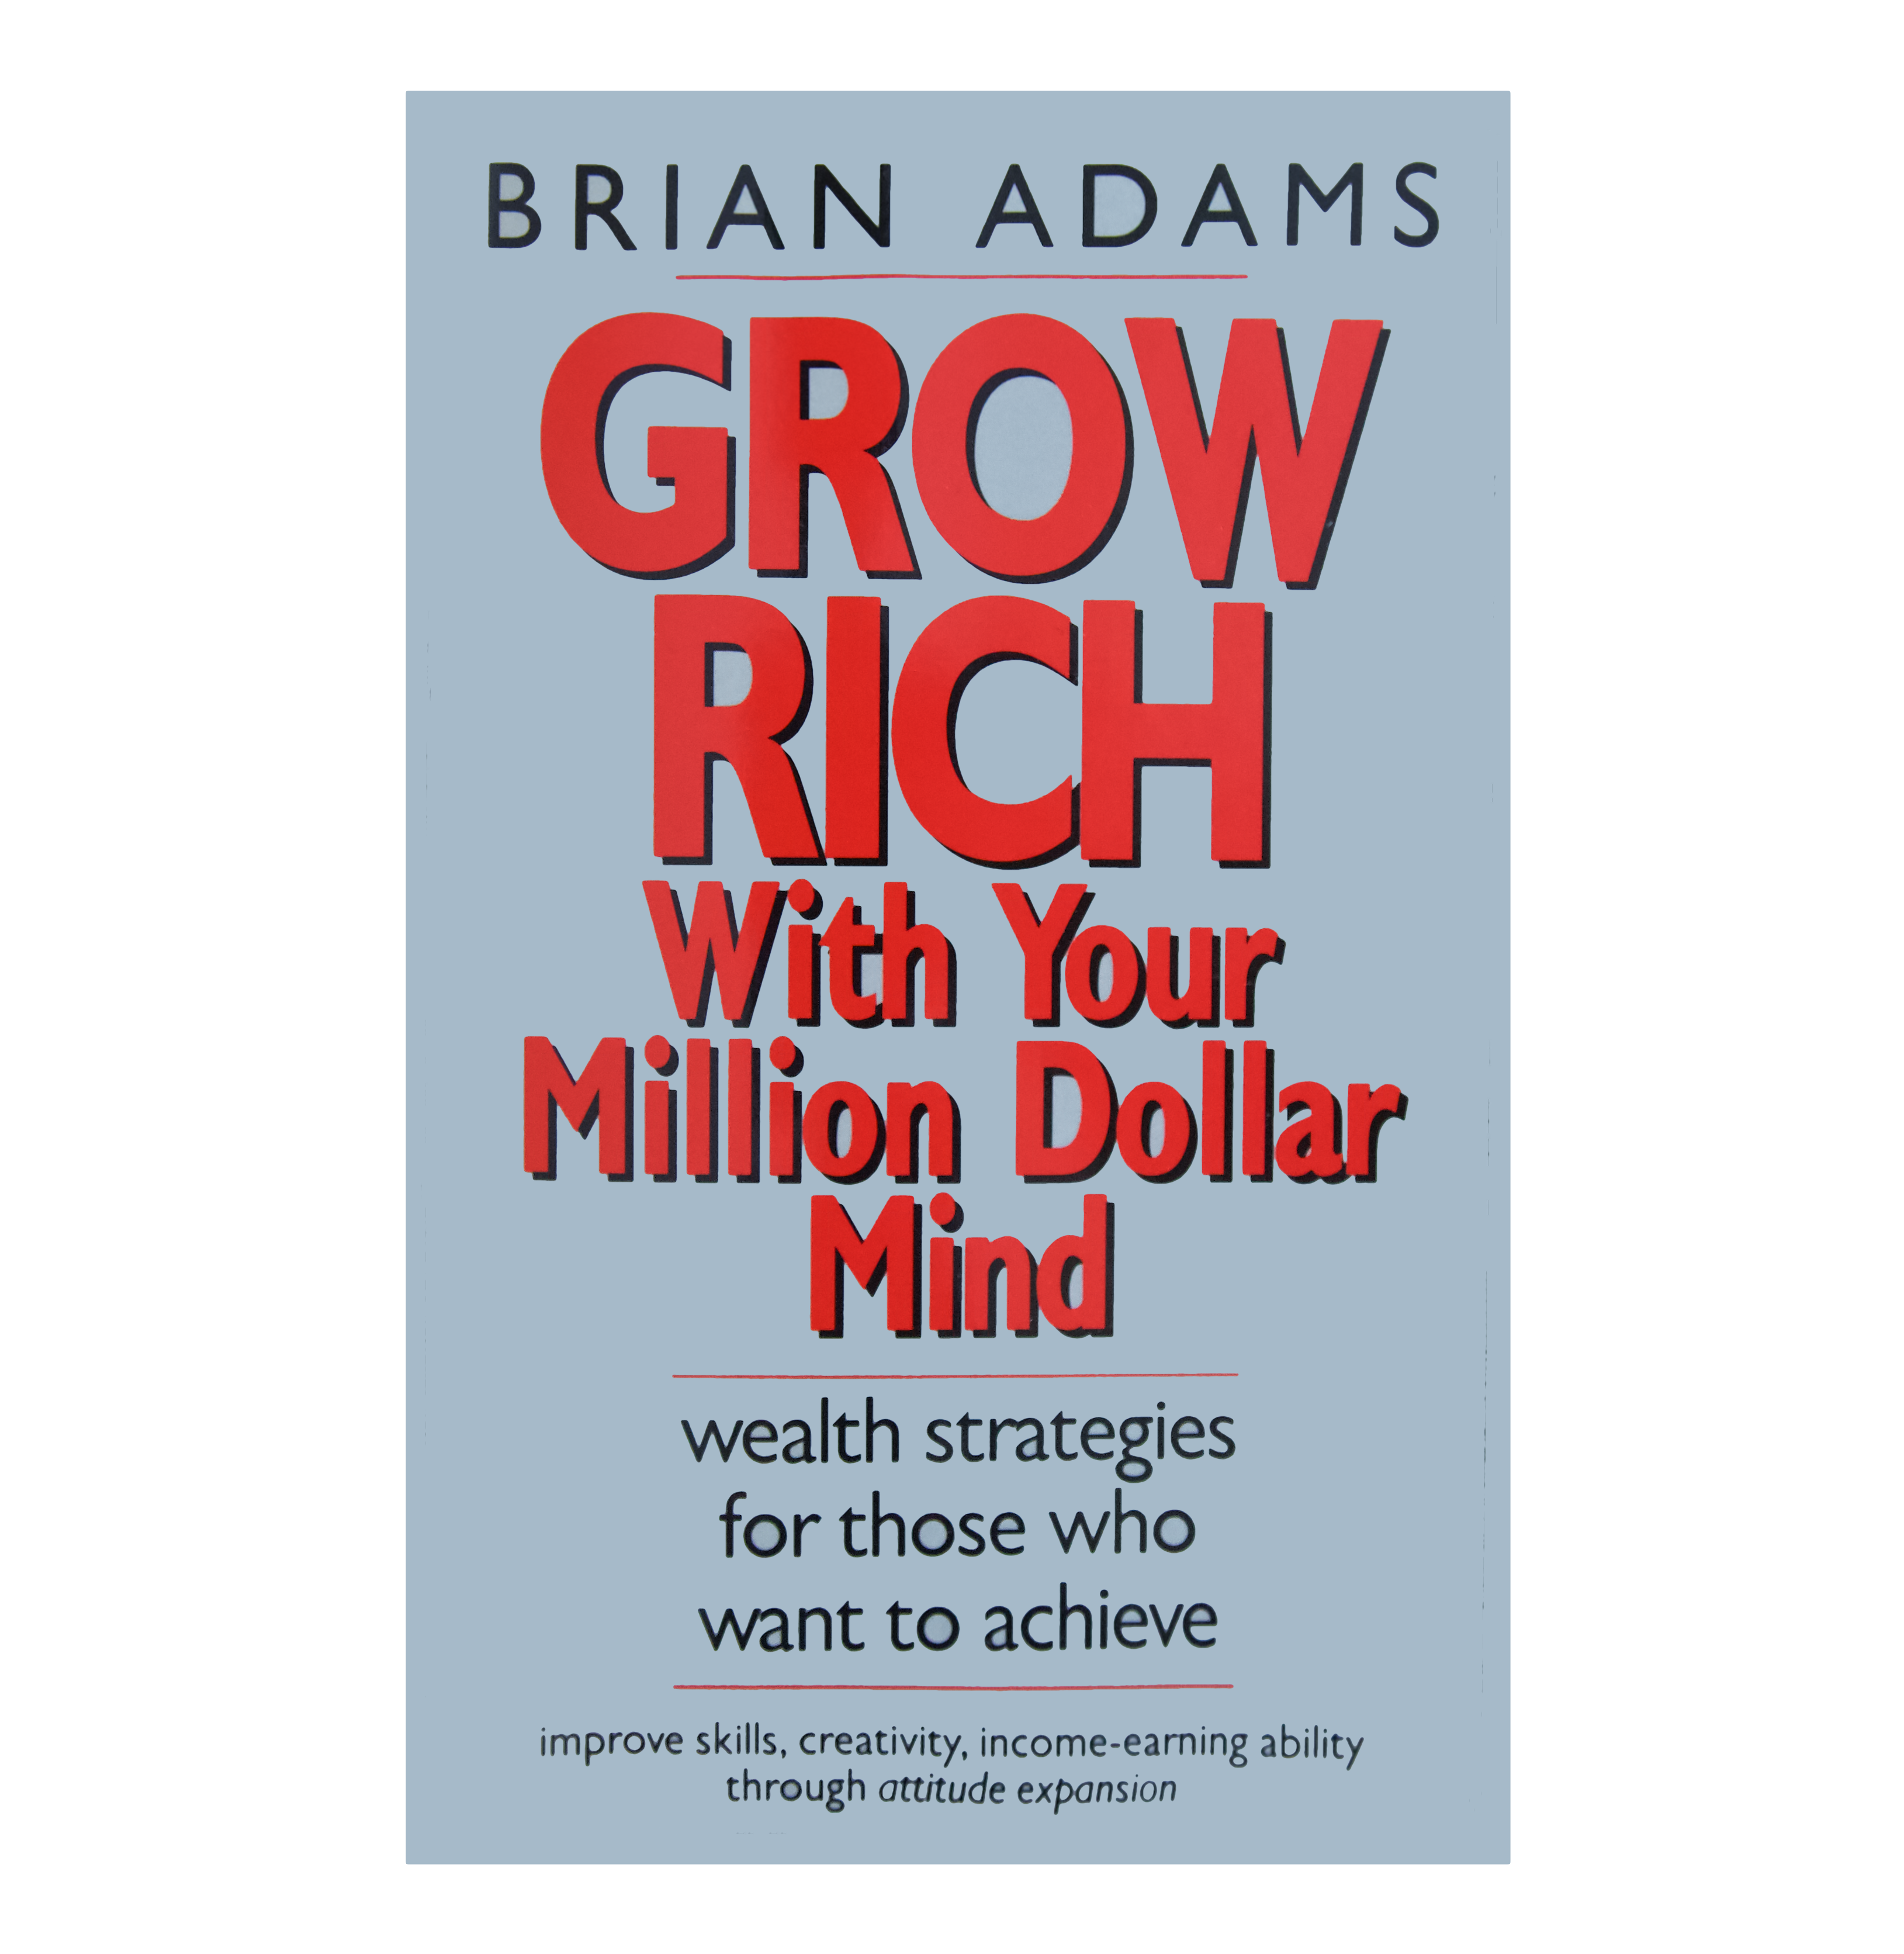 GROW RICH WITH YOUR MILLION DOLLAR MIND